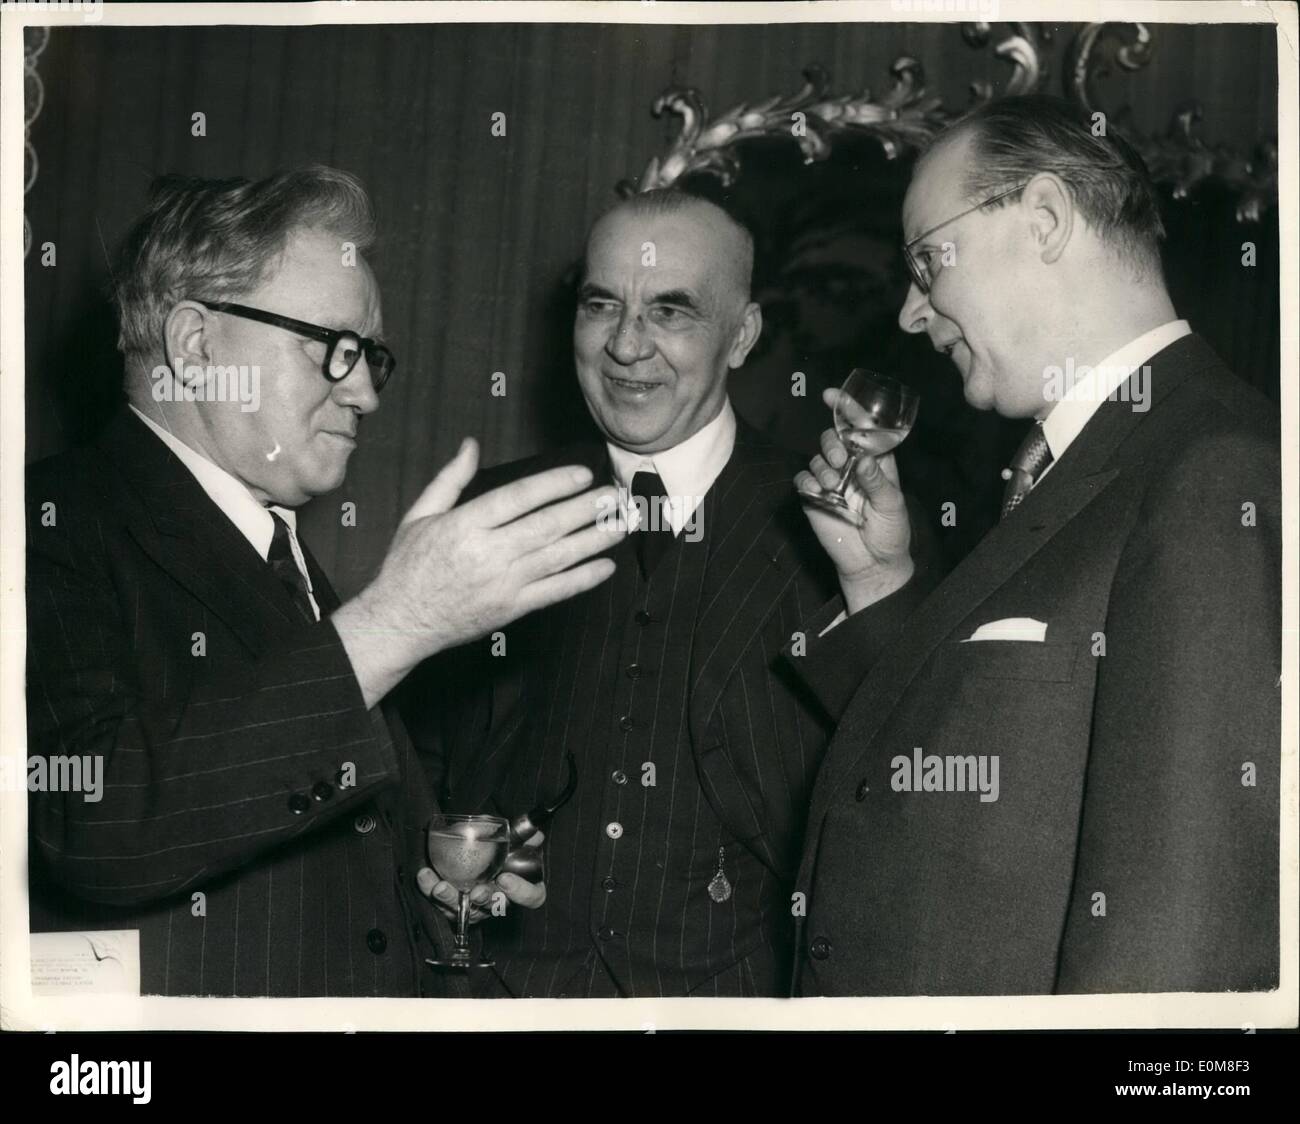 Feb. 02, 1954 - Luncheon To Dr. Zinn: A luncheon was given by the German Charge d'Affaires, at the Dorchester Hotel today, to Dr. Georg Zinn, Speaker of the Upper House of the Bonn Federal Parliament and Prime Minister of the American zone of Hesse, who is in London on a week's visit as guest of the Foreign Office. Photo shows Seen at the Dorchester today are (L to R) : Mr. Herbert Morrison, Herr Dr. Schlange-Schoningen, the German Ambassador, and Dr. Georg Zinn. Stock Photo